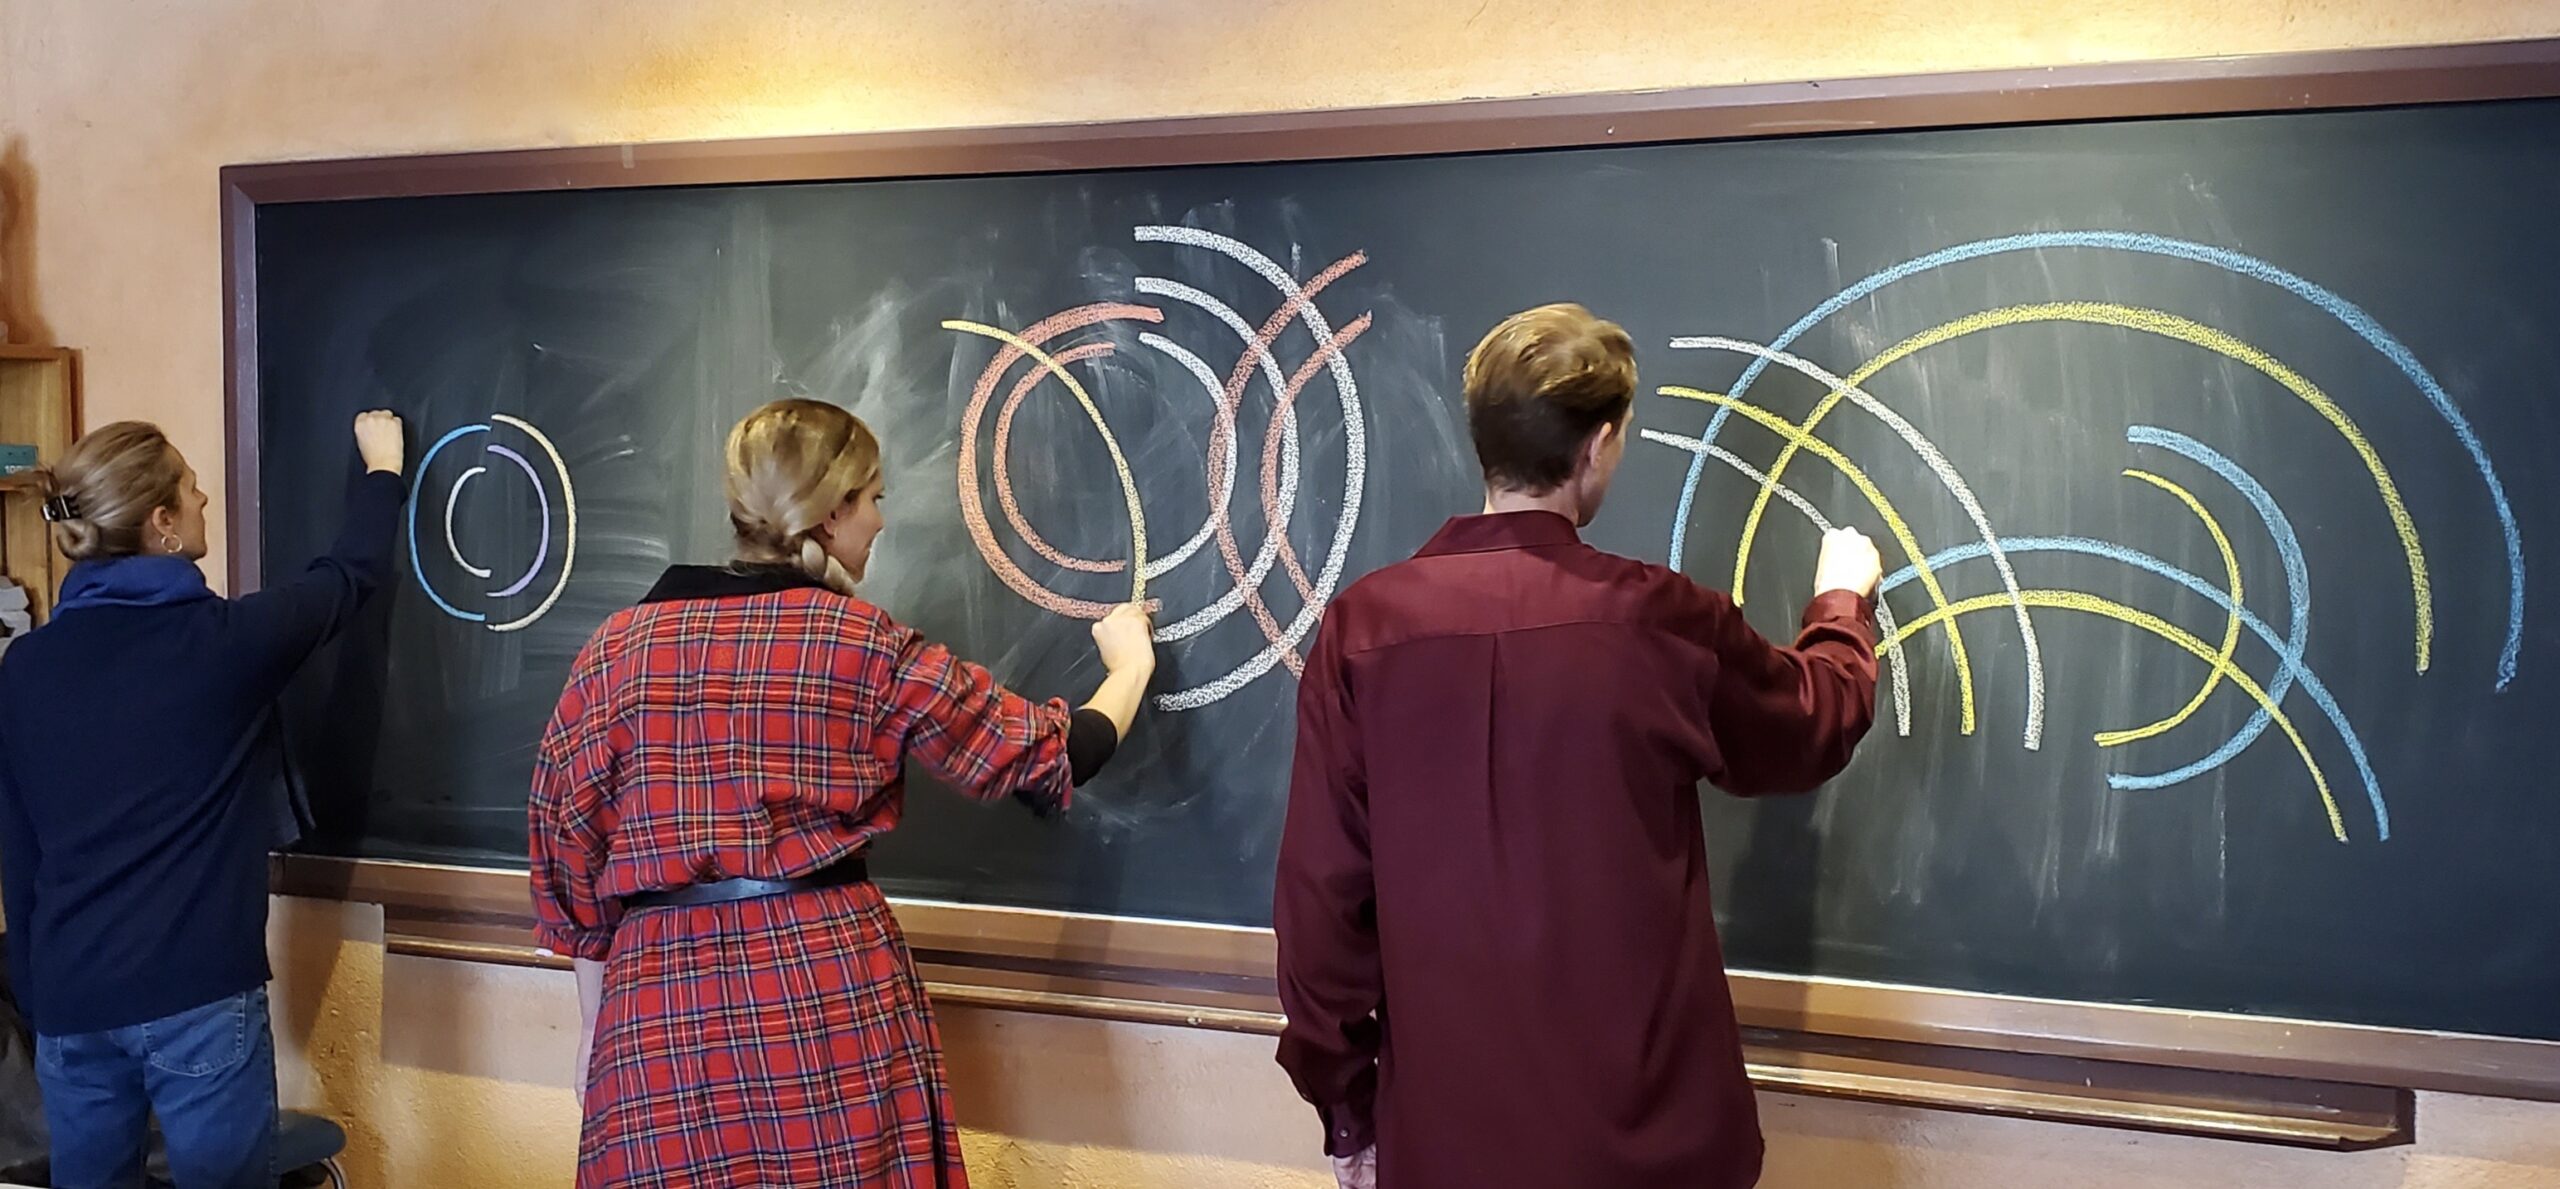 Two female students on the left and one male student on the right have their backs towards the camera as they draw bright curved lines on a chalkboard.